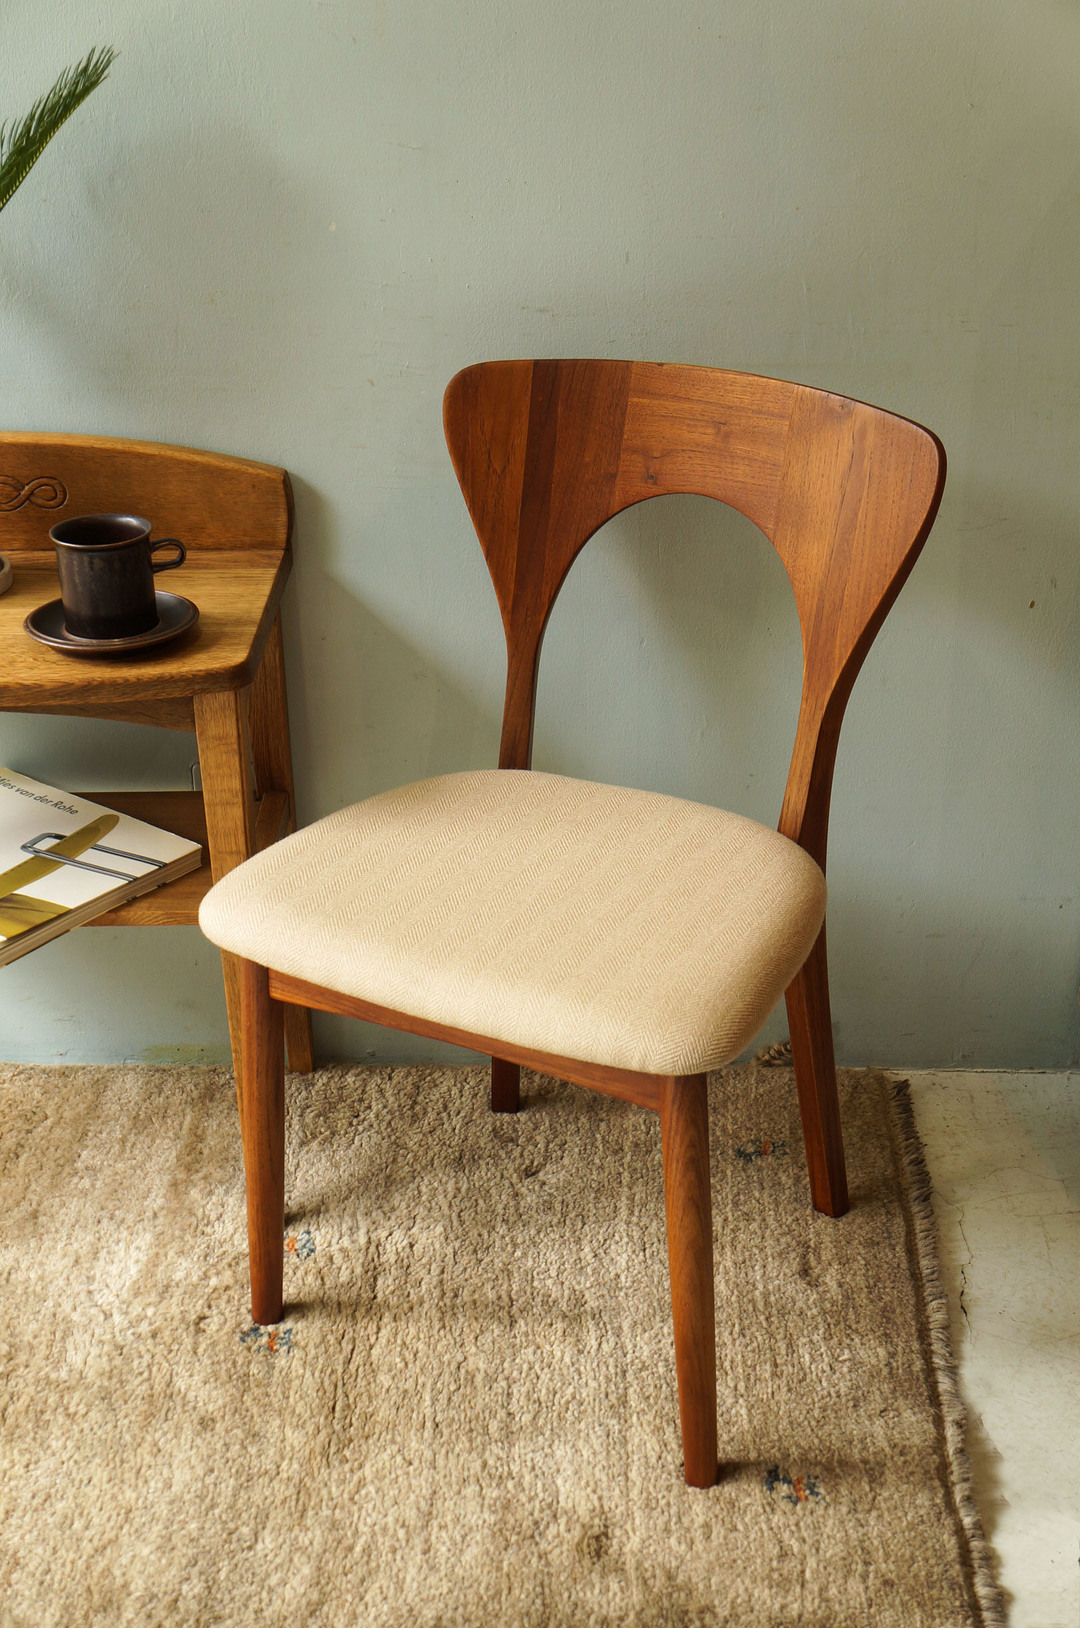 Danish Vintage Dining Chair Peter by Niels Koefoed for KOEFOEDS HORNSLET/デンマーク ヴィンテージ ダイニングチェア ピーター ニールス・コフォード 椅子 北欧家具 チーク材 ベージュ